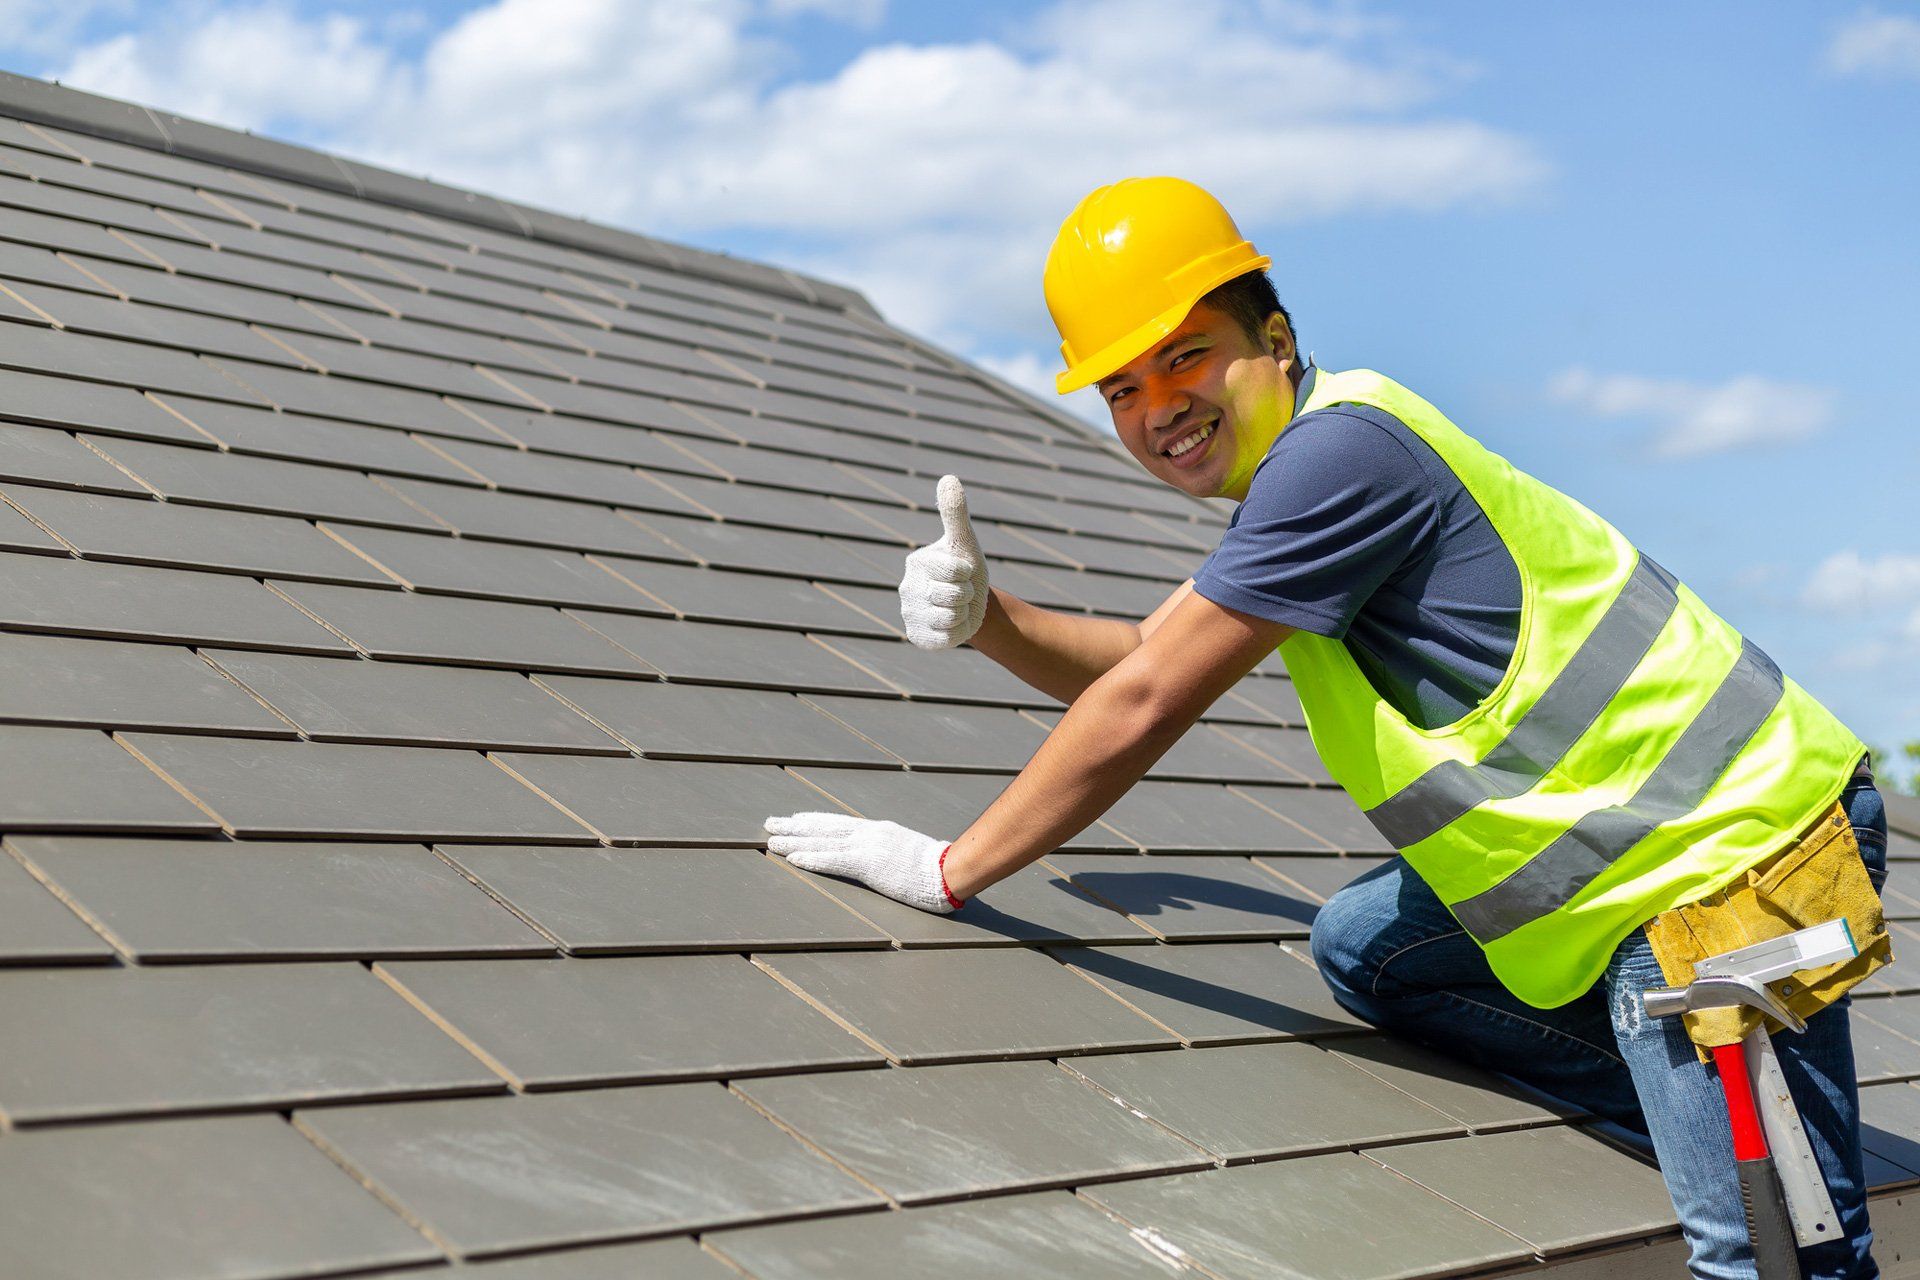 Hp Commercial Roofing Pro - Top 10 Best Roofers In San Diego